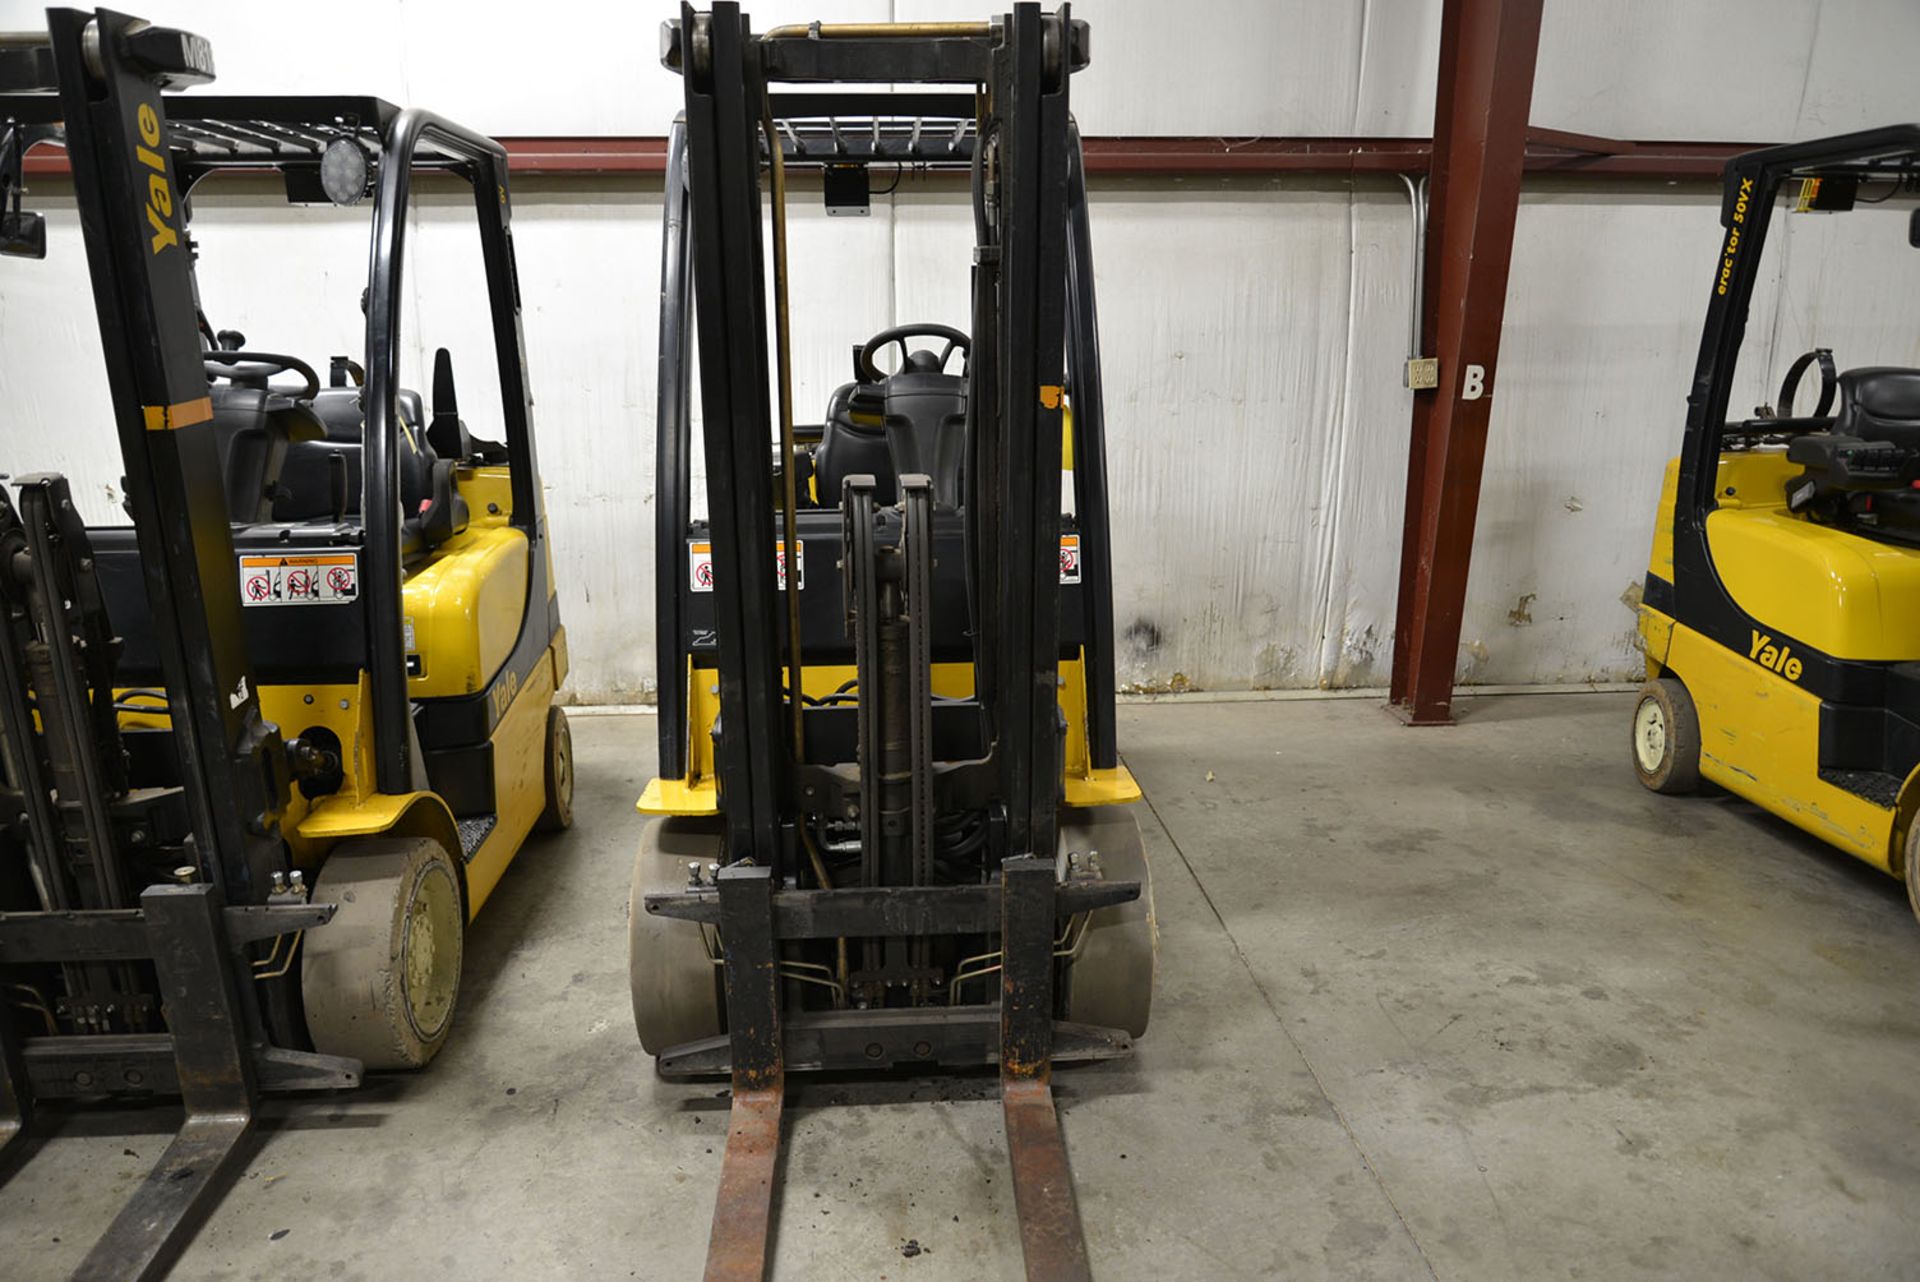 2008 YALE 5,000-lb. Capacity Forklift, Model GLC050VXNV, S/N A910V13934F, LPG, Solid Non-Marking - Image 2 of 6